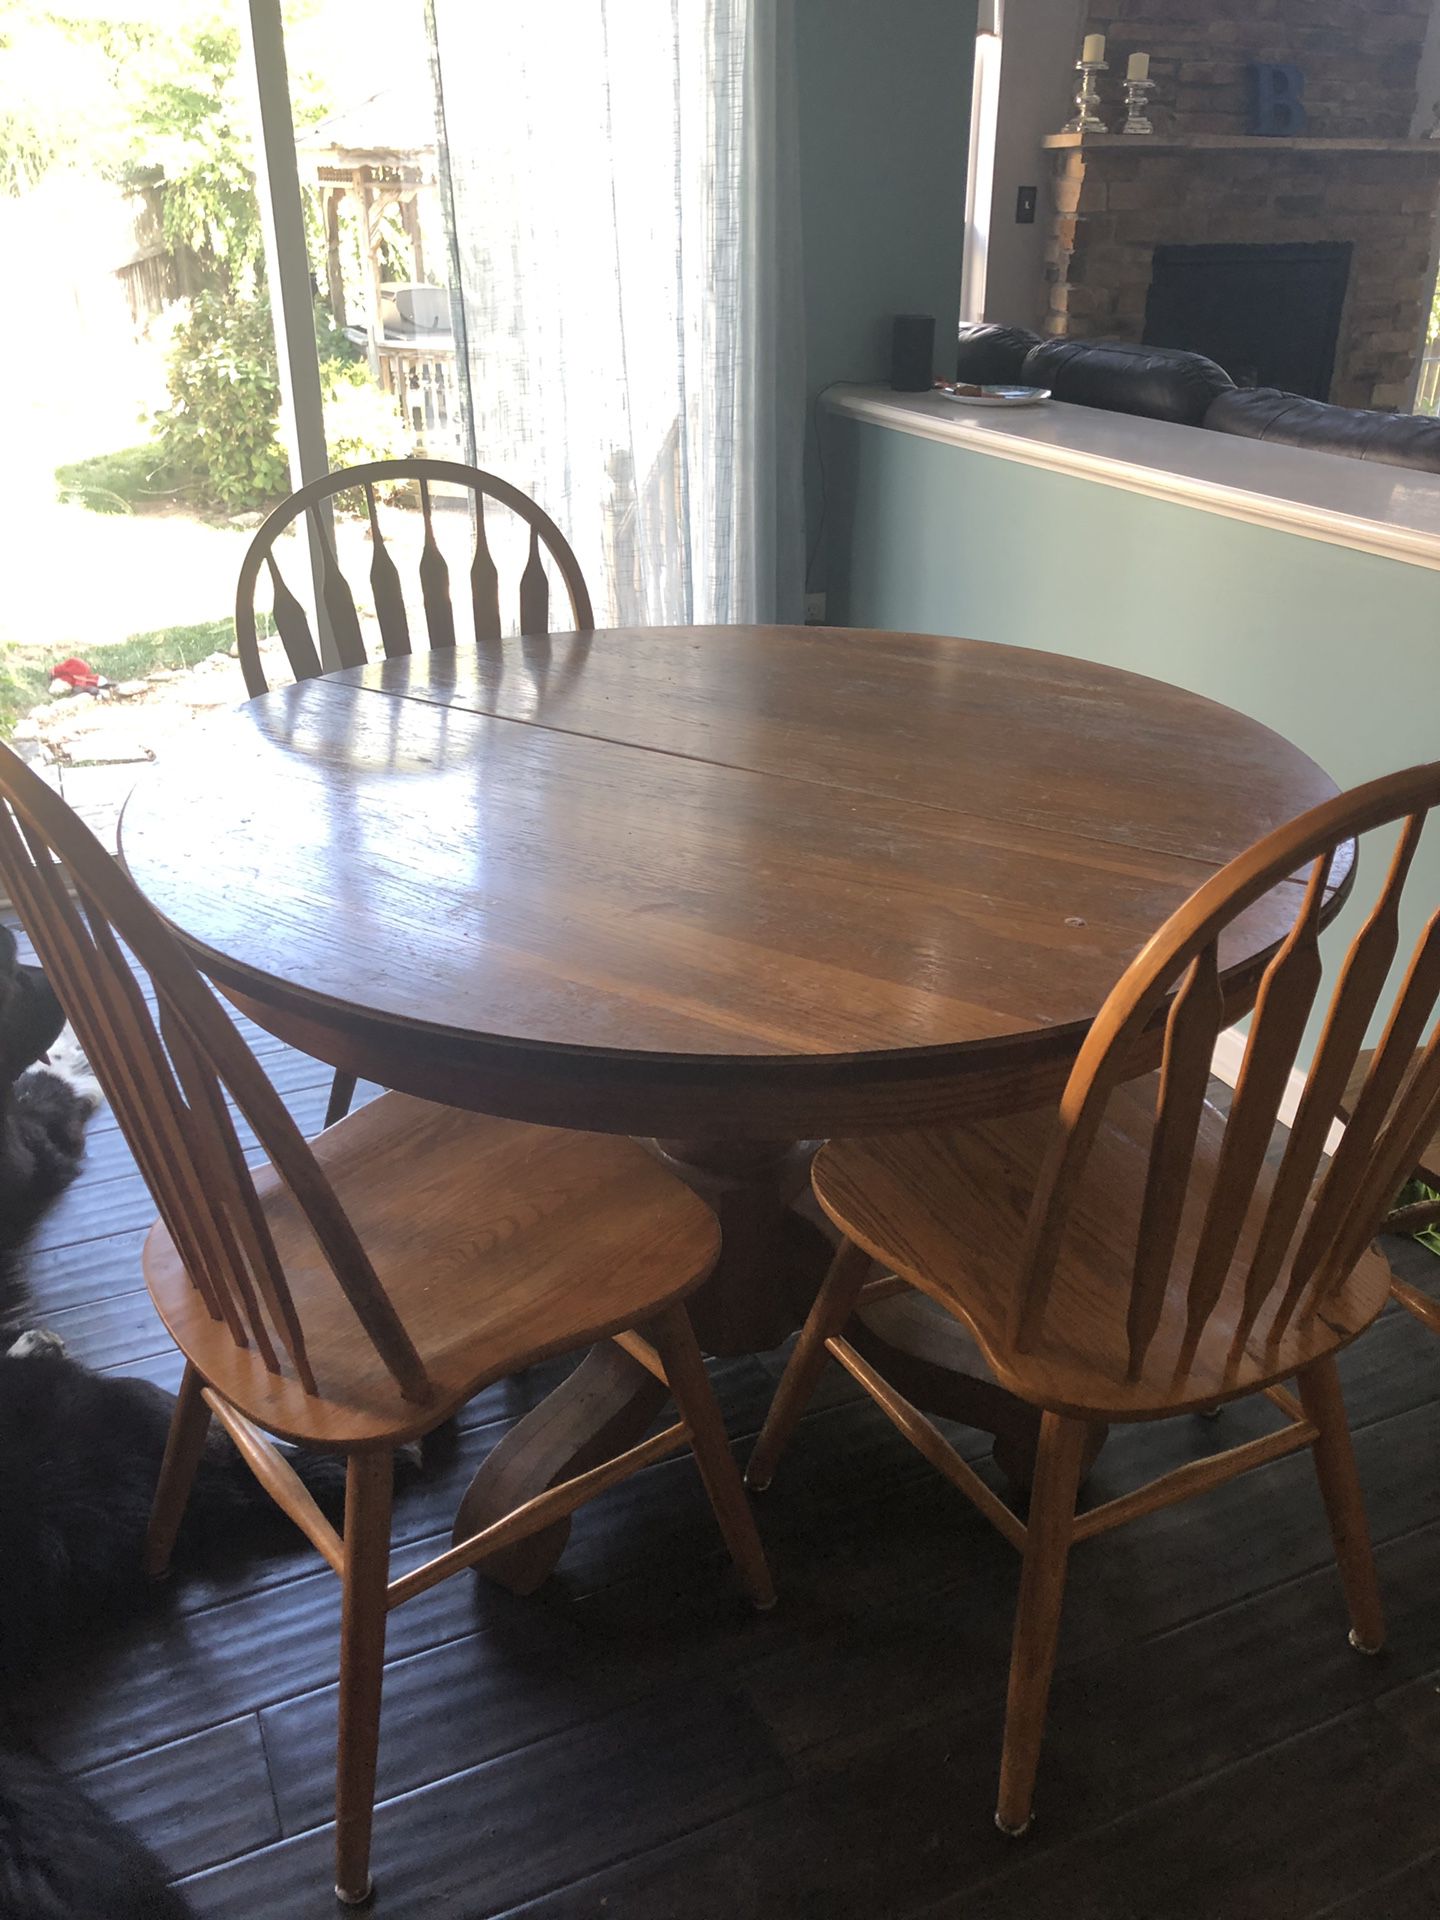 Wood table and 4 chairs